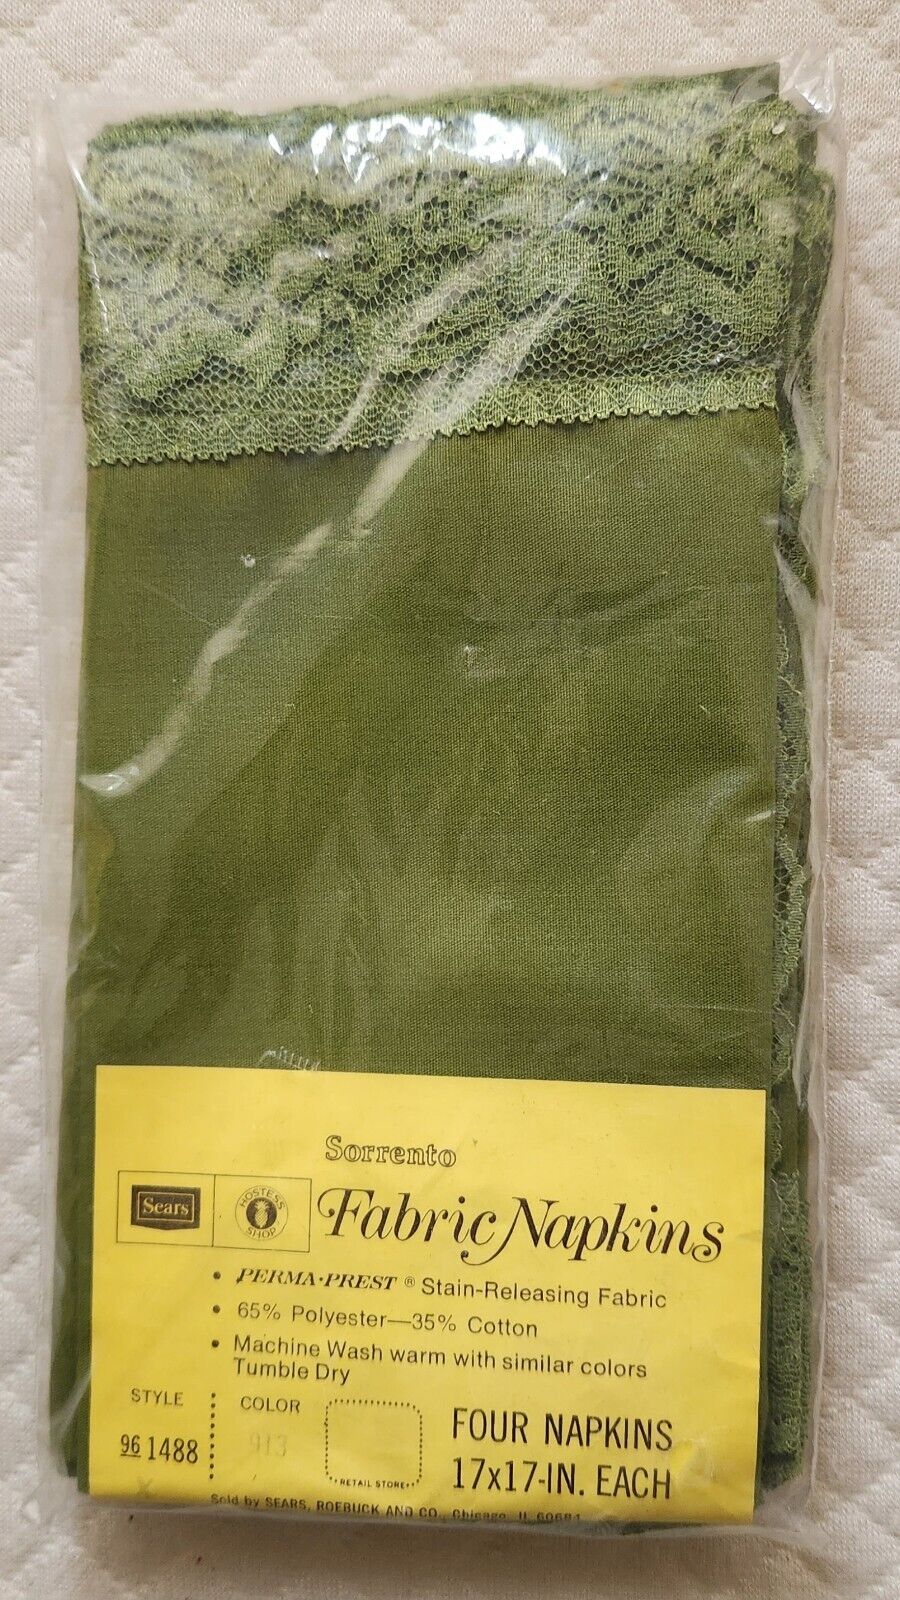 Sears Vintage Lace Perma Prest Napkins. New, sealed. Moss green. 17x17. Set of 4